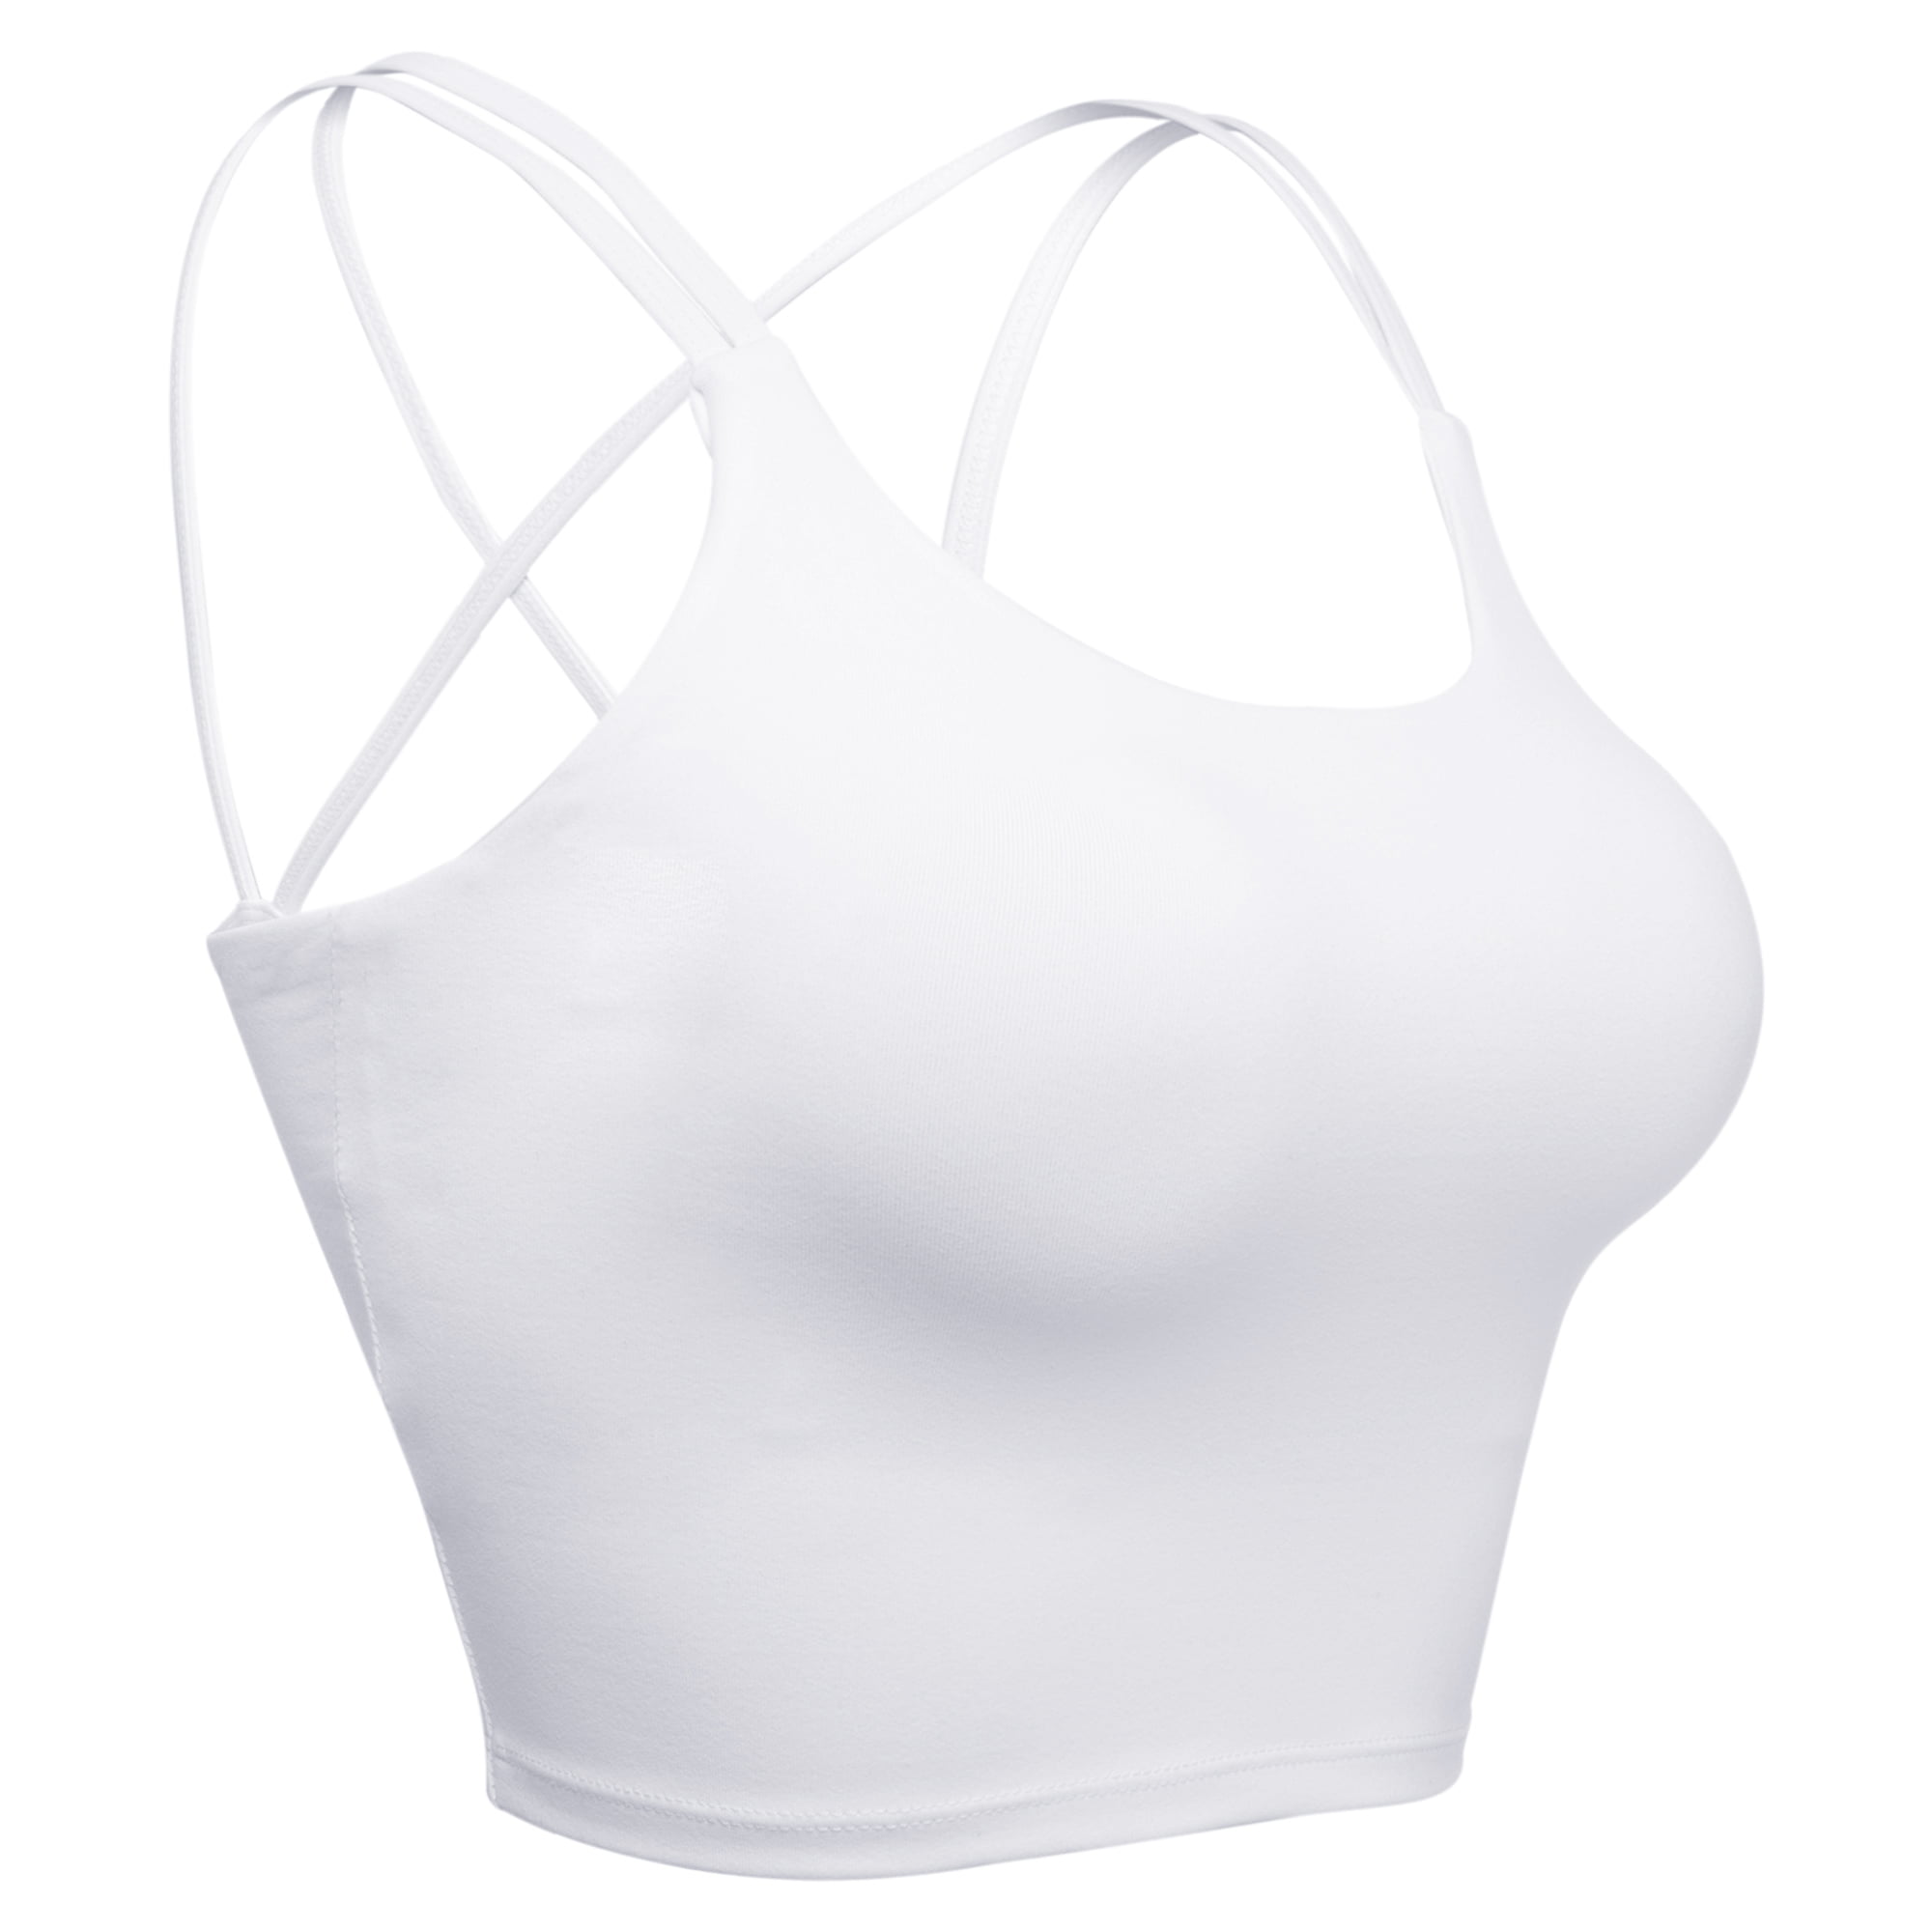  Strappy Sports Bras For Women - Criss Cross Back Sexy  Wireless Padded Yoga Bra Cute Workout A02-White Medium